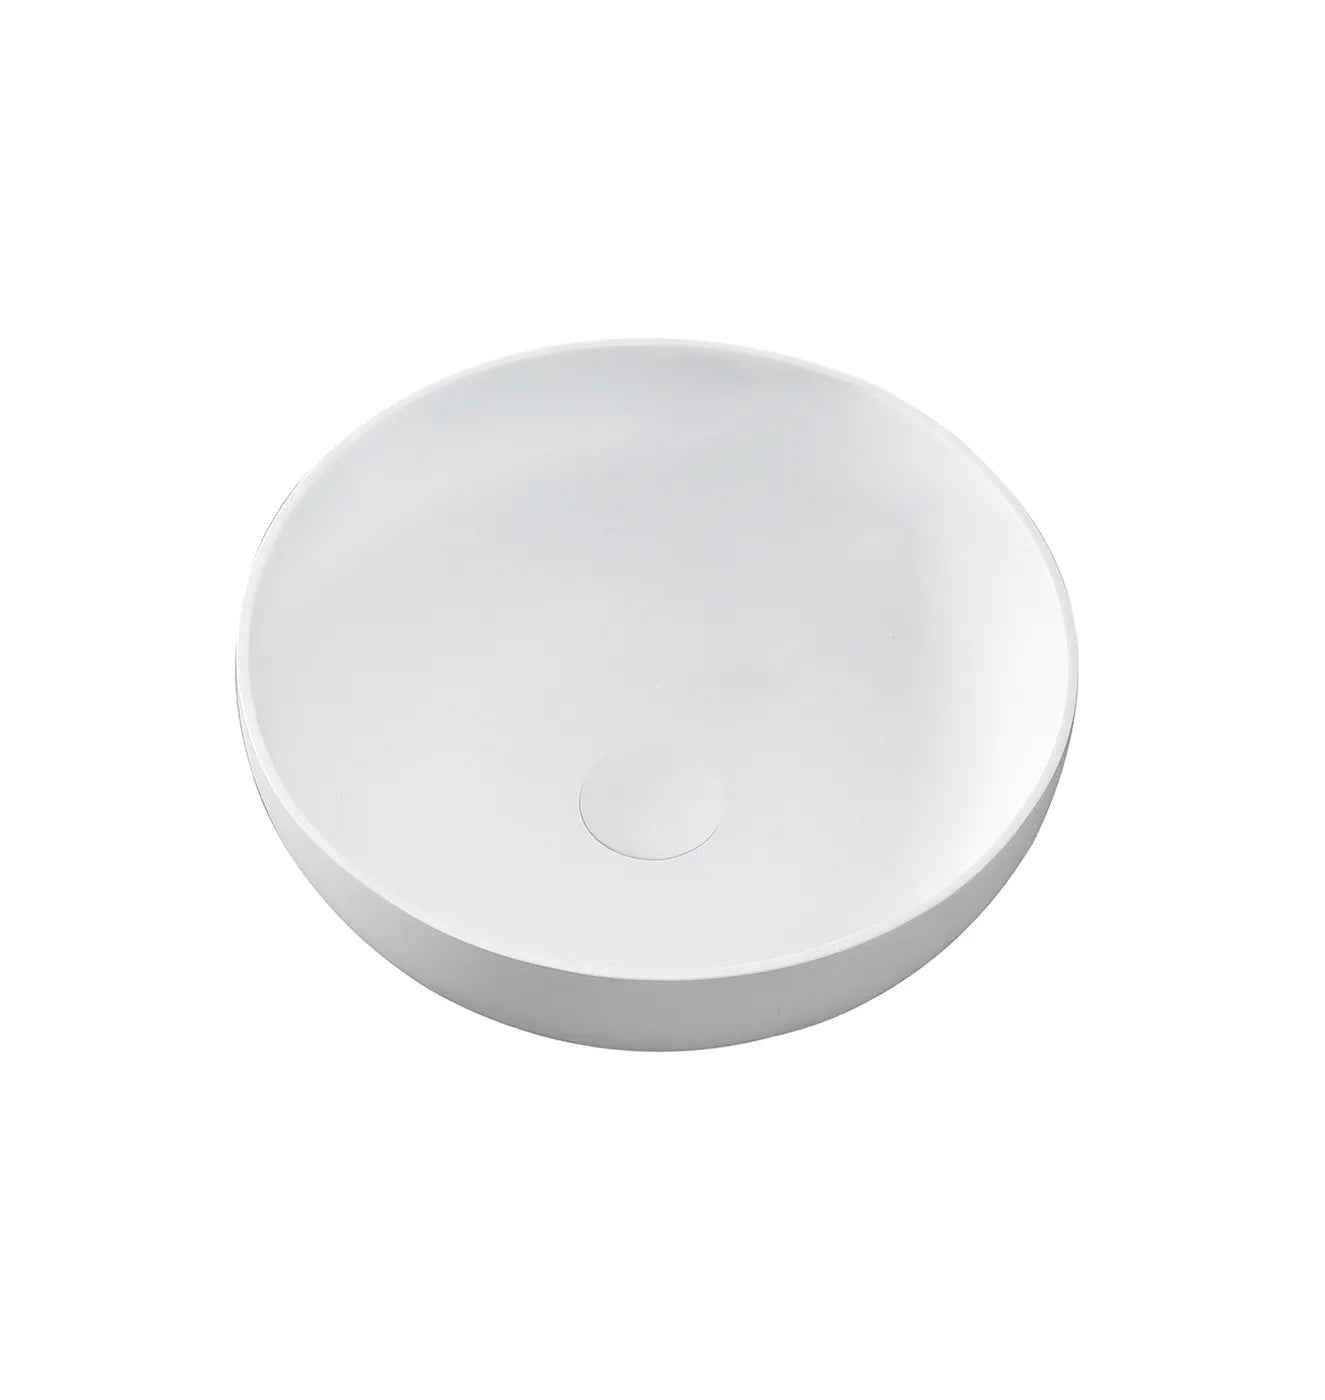 Matte White Solid Surface Basin 390x390x145